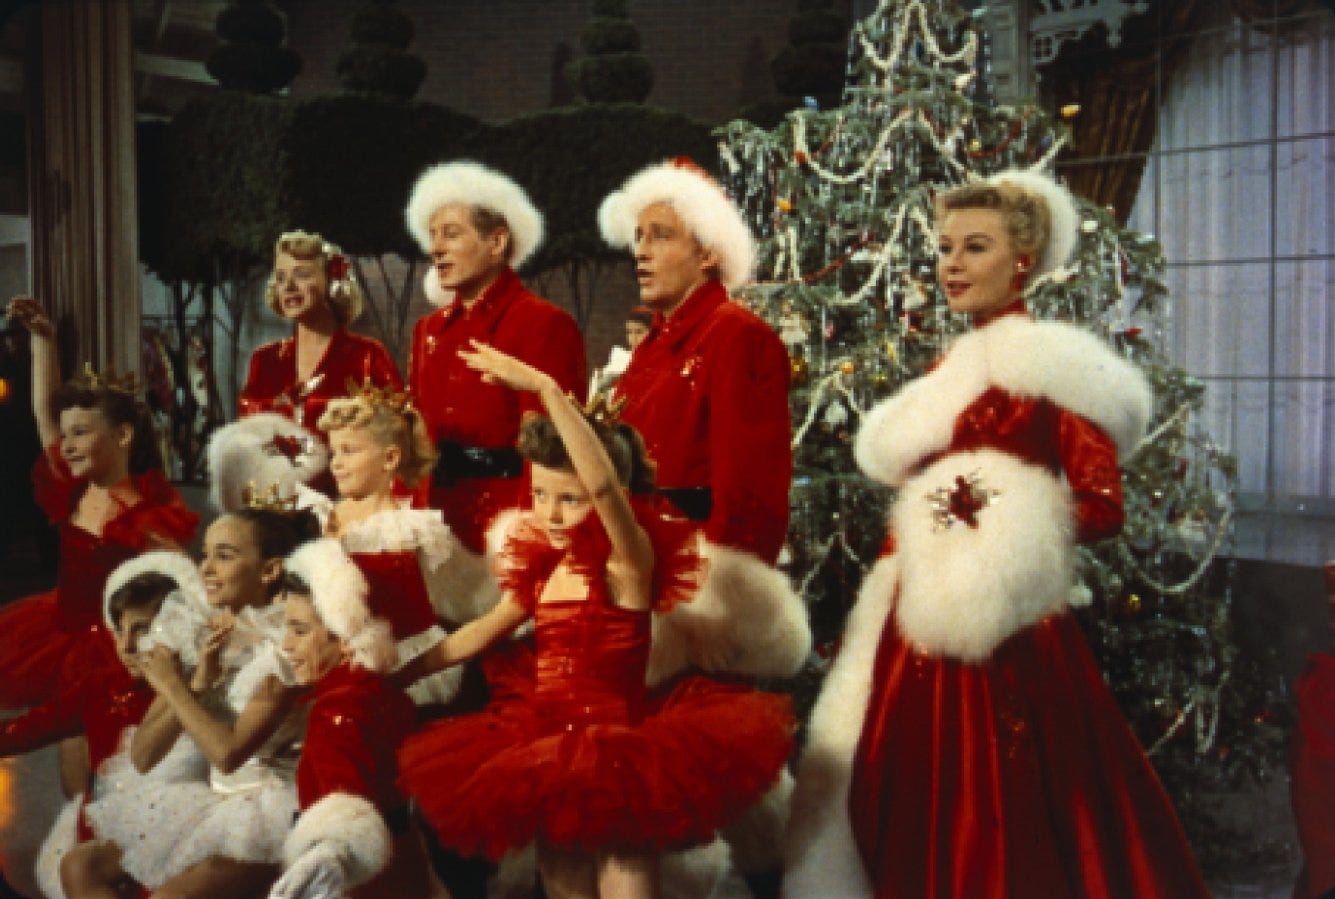 Harkins Theatres announces holiday movies for Tuesday Night Classics